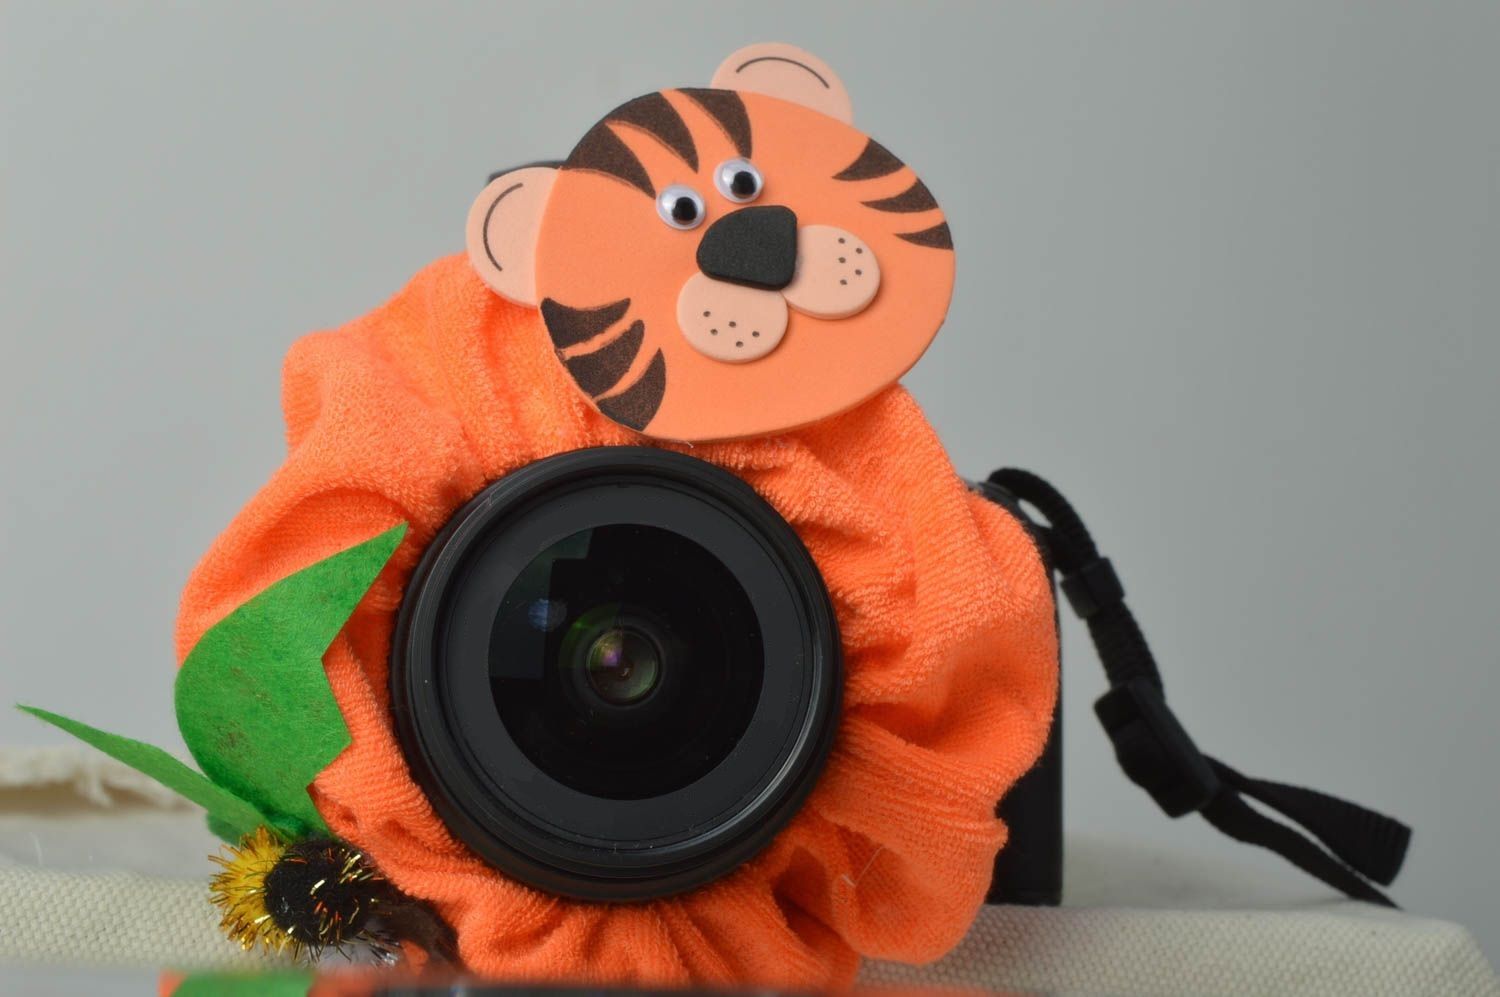 Handmade unusual toy for camera lens unusual accessories for camera cute case photo 1